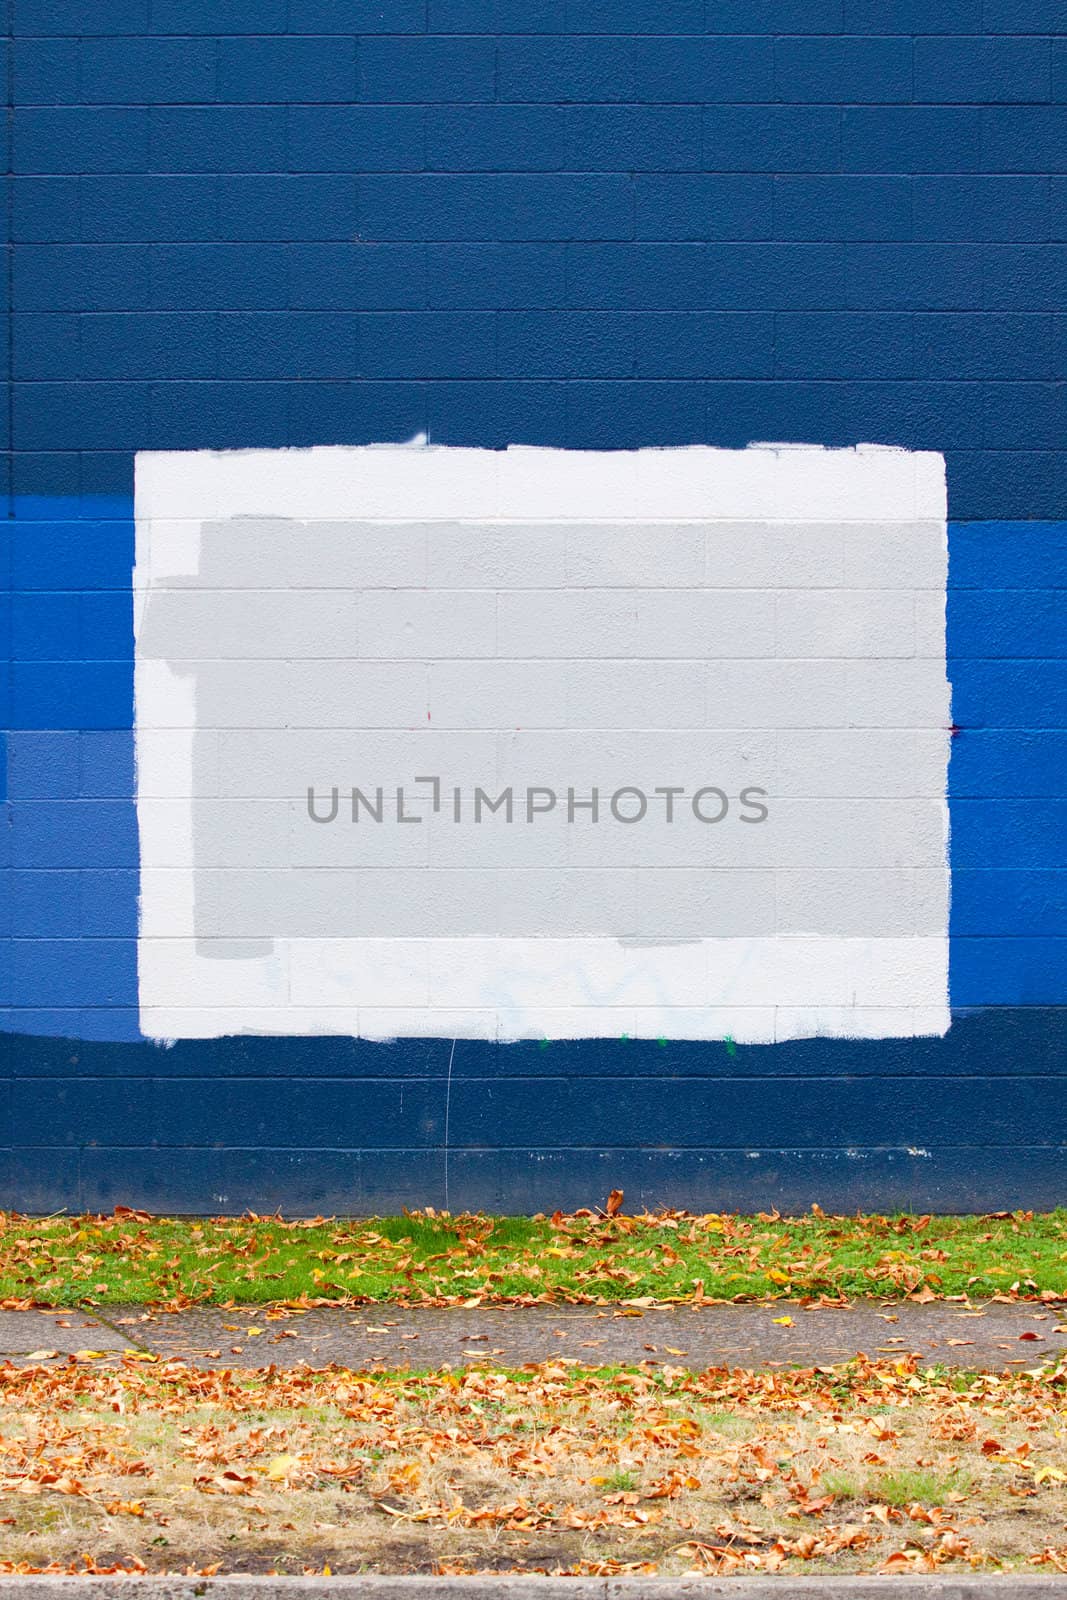 A dark blue wall of a building next to a street with autumn leaves during the fall that has grey rectangles of paint to cover up graffiti.